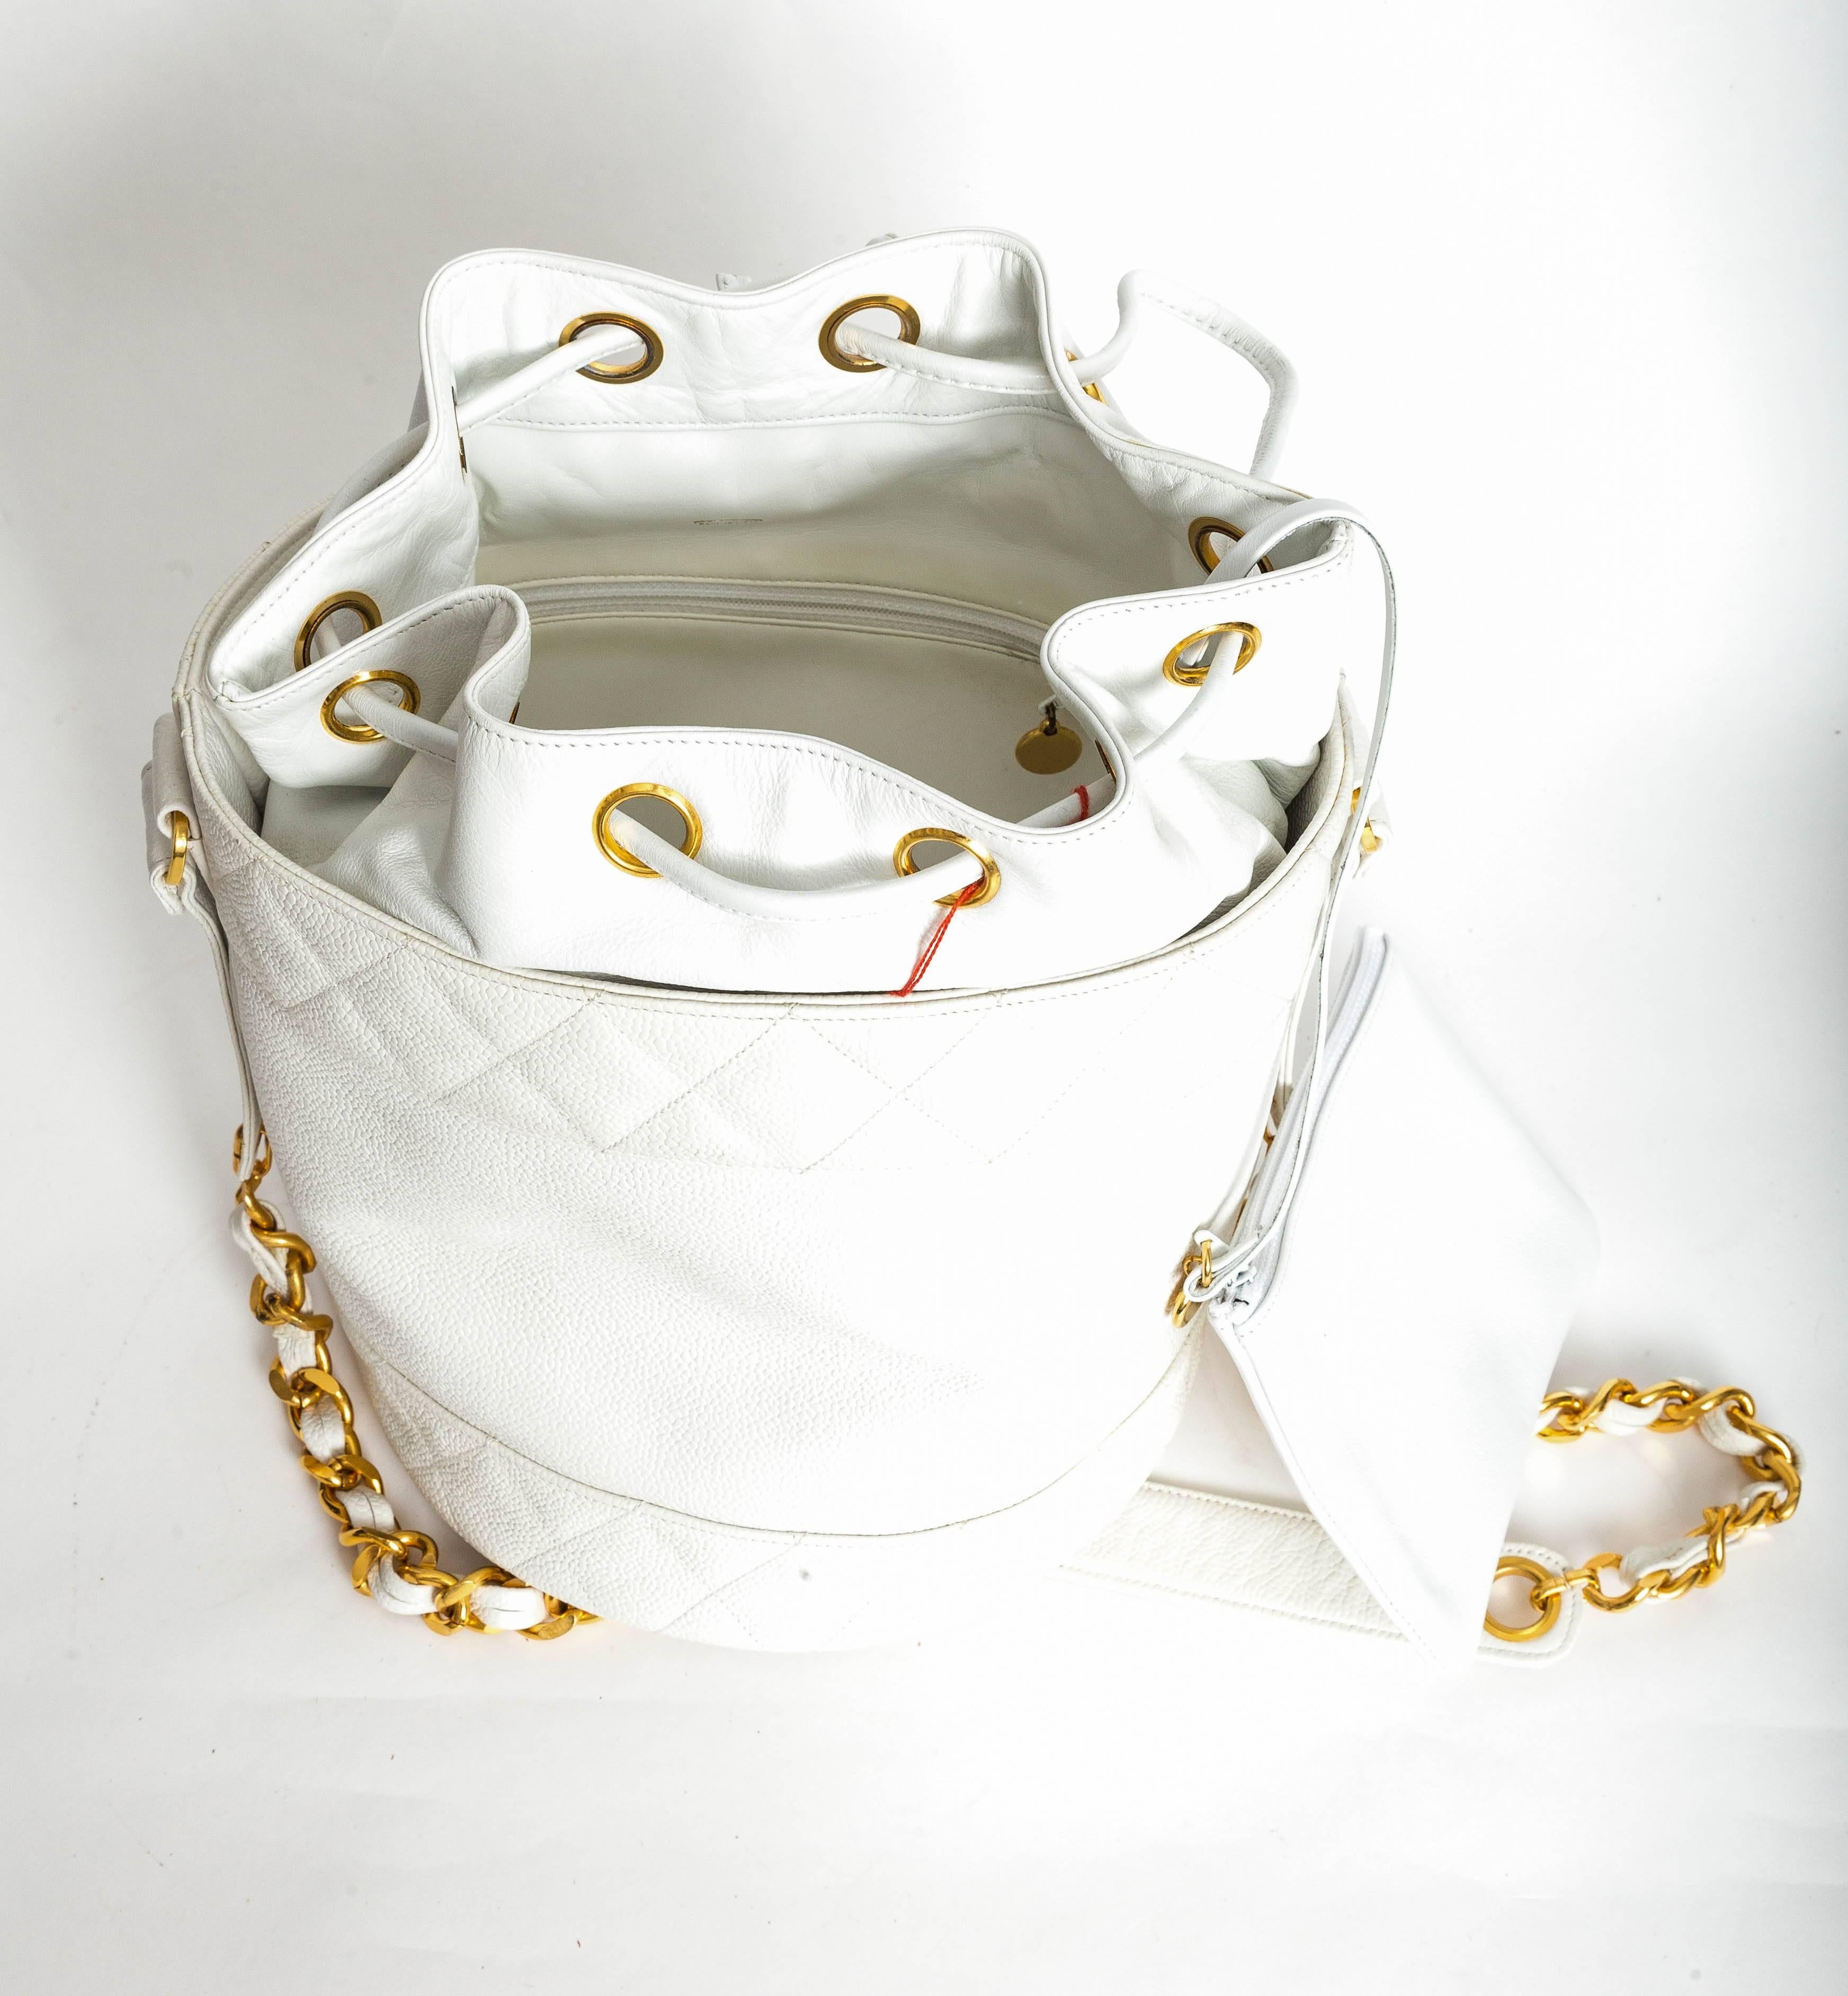 Chanel White Caviar Drawstring Bucket Bag with Interior Pouch and Gold Hardware  1